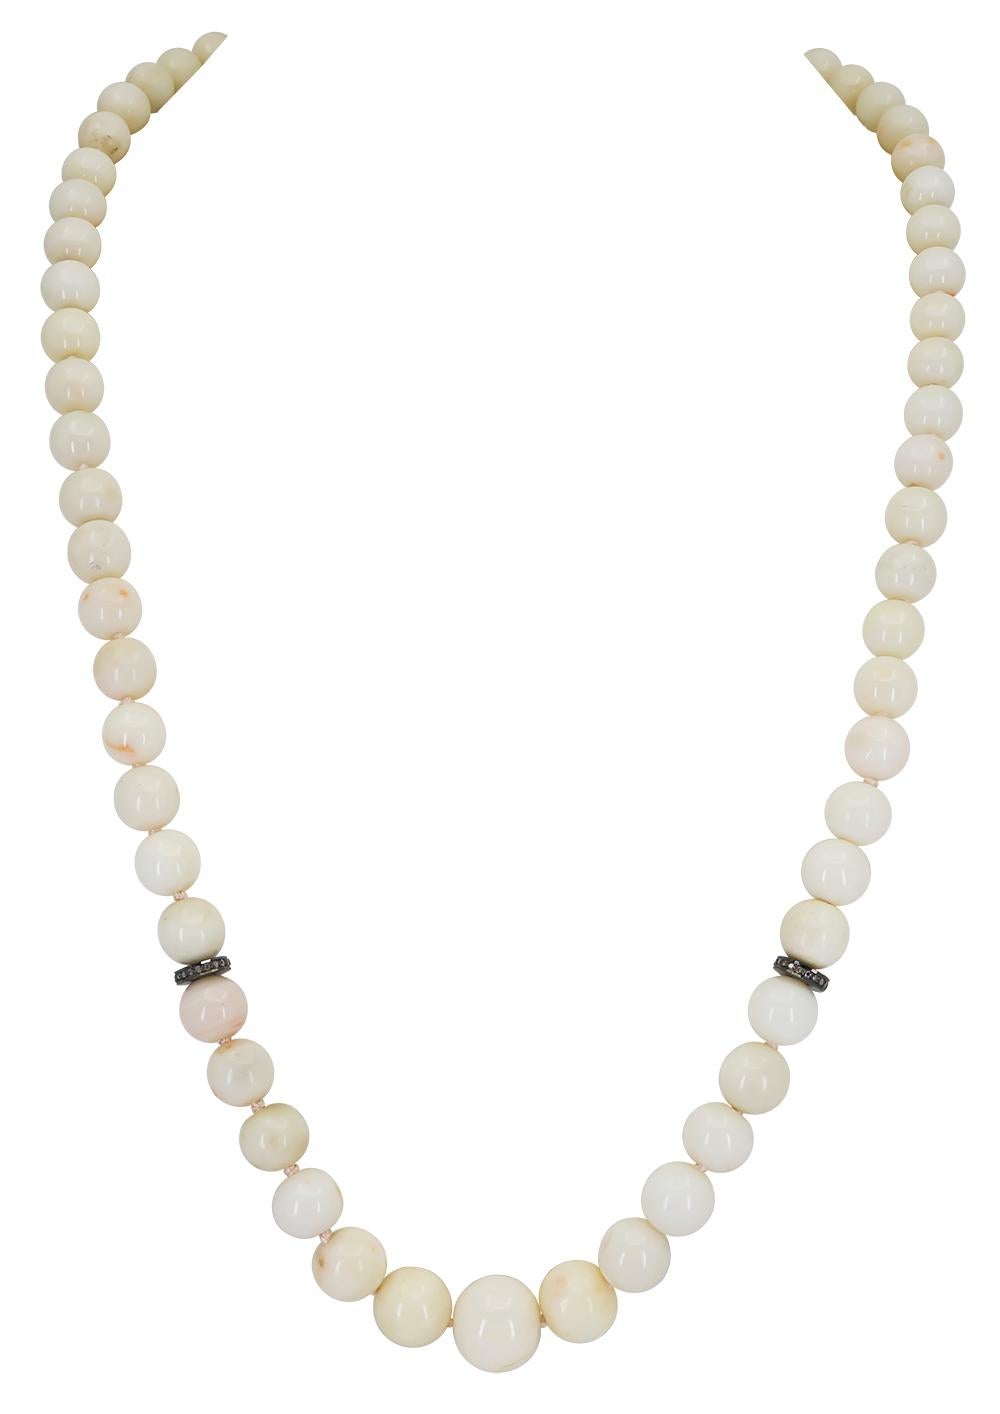 coral necklace white